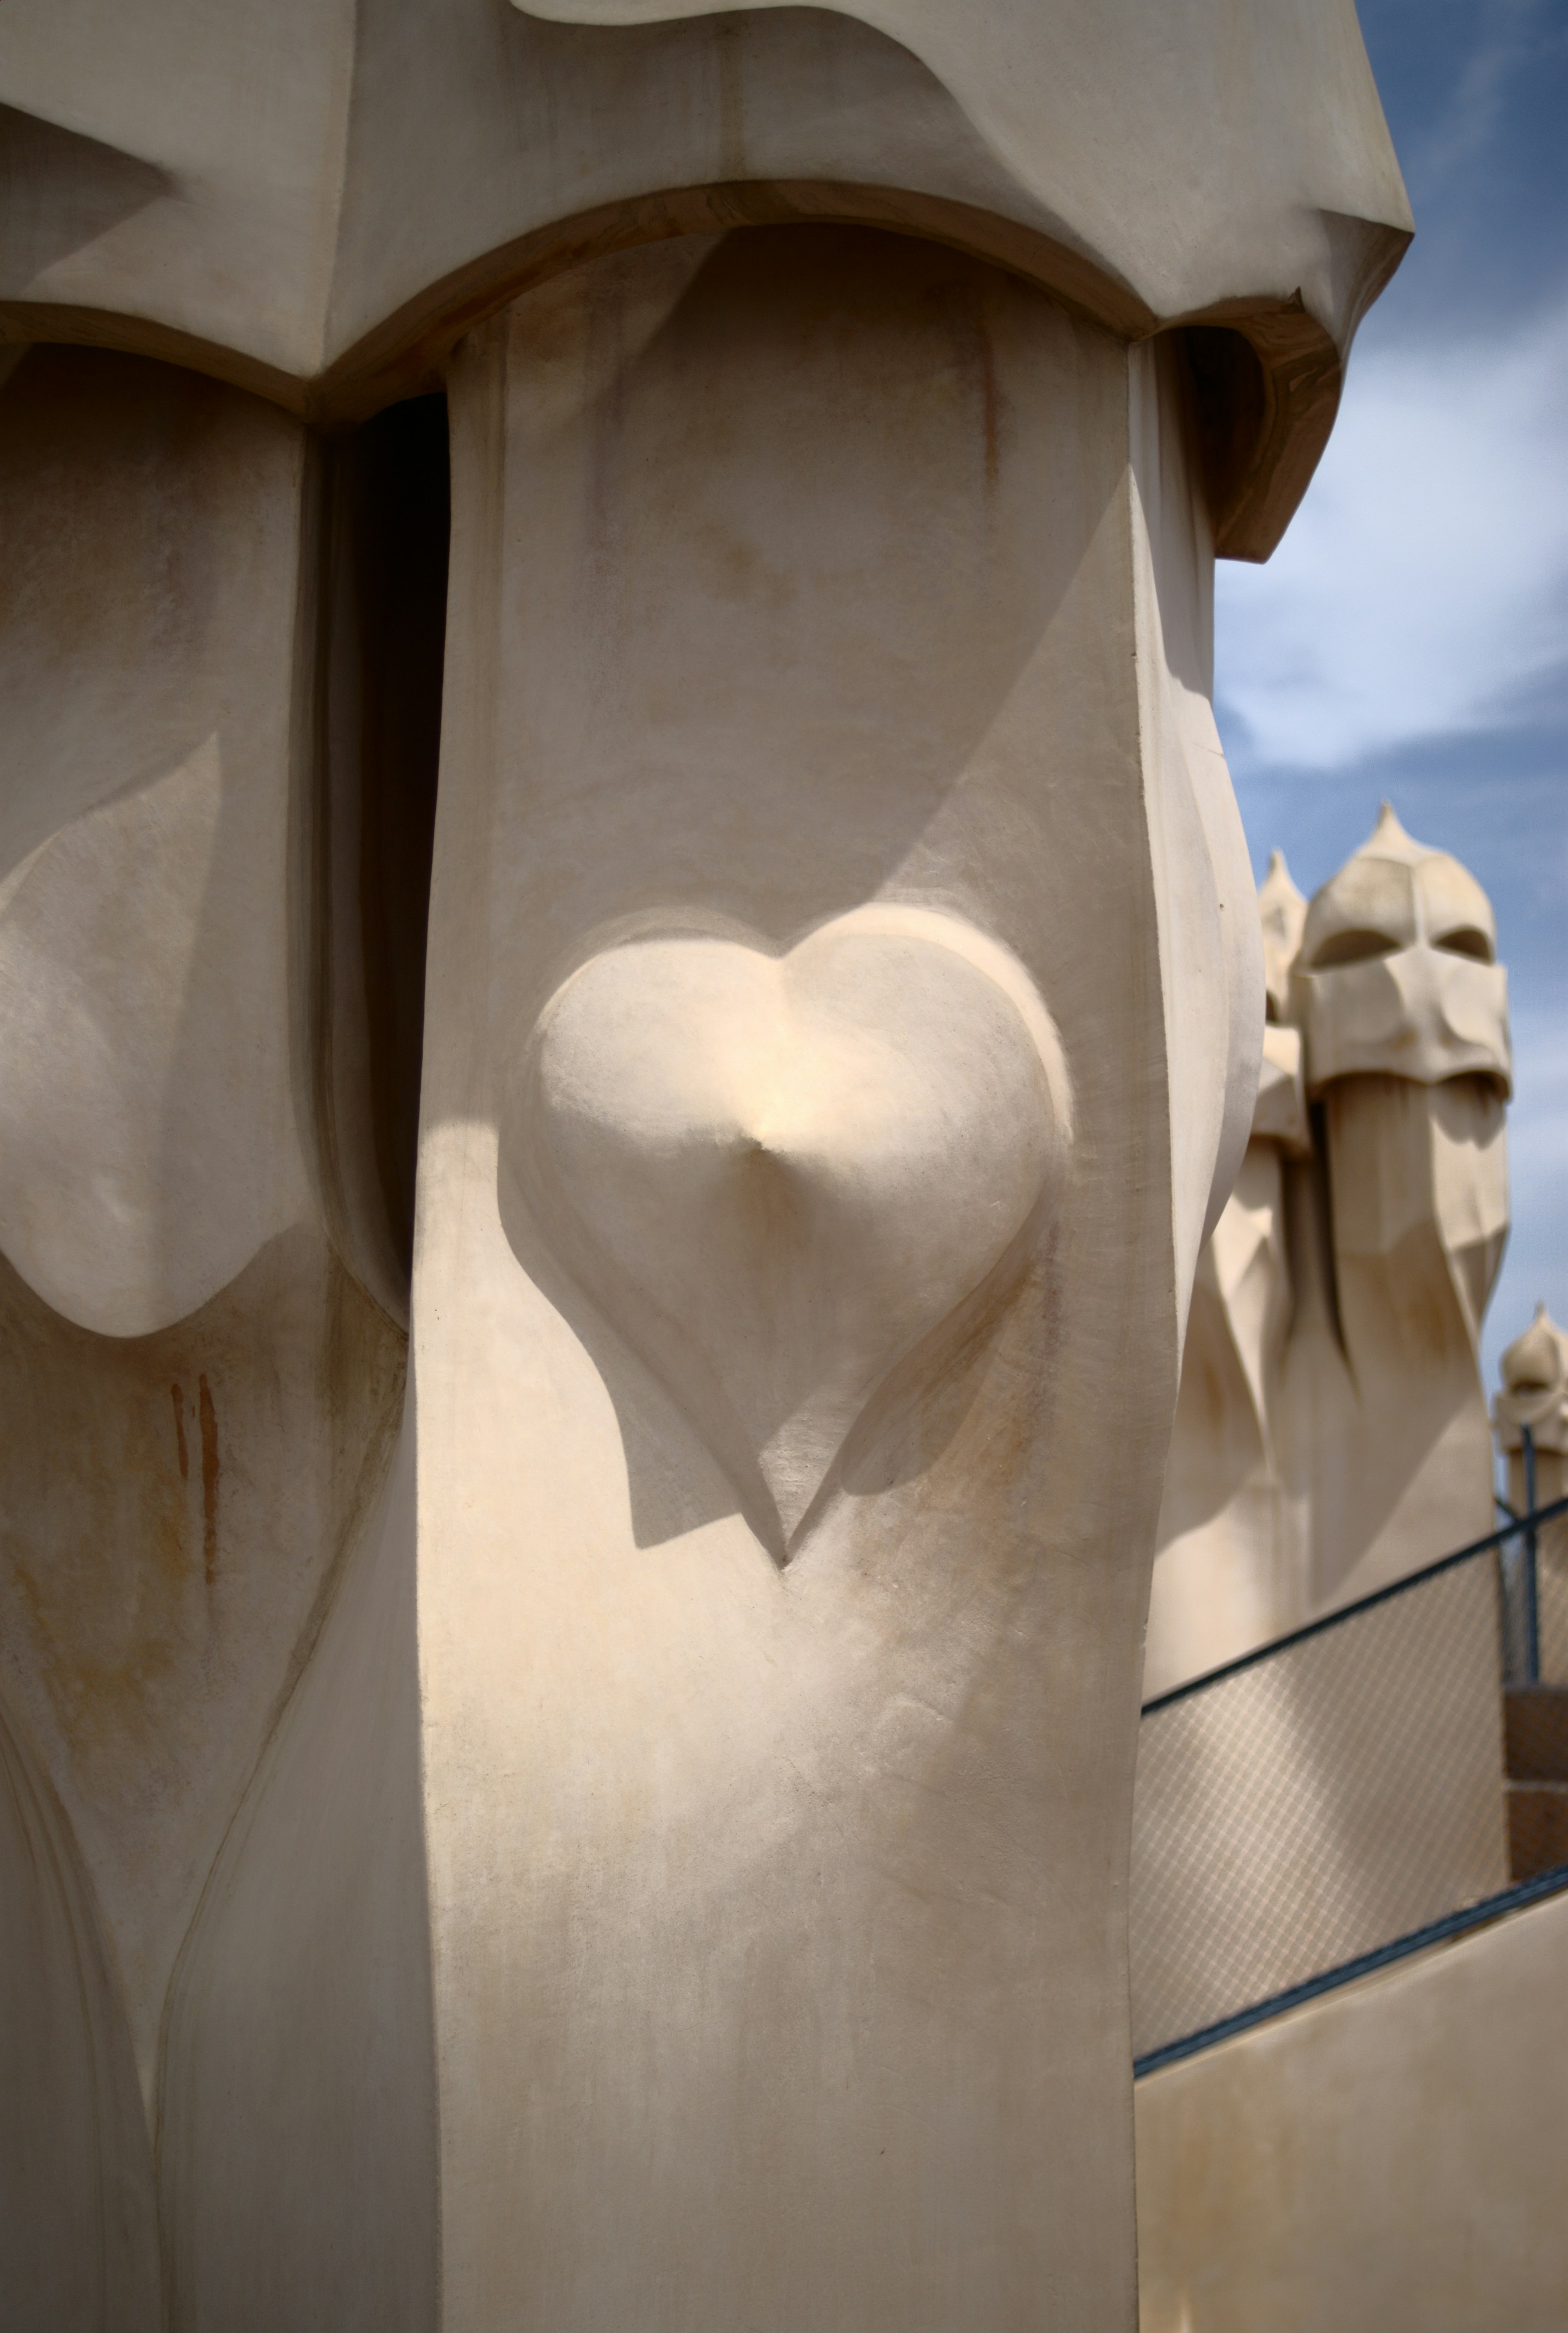 Taken on the rooftop of Casa Milà in Barcelona, Spain. There were so many options, I went for a more simplified view.